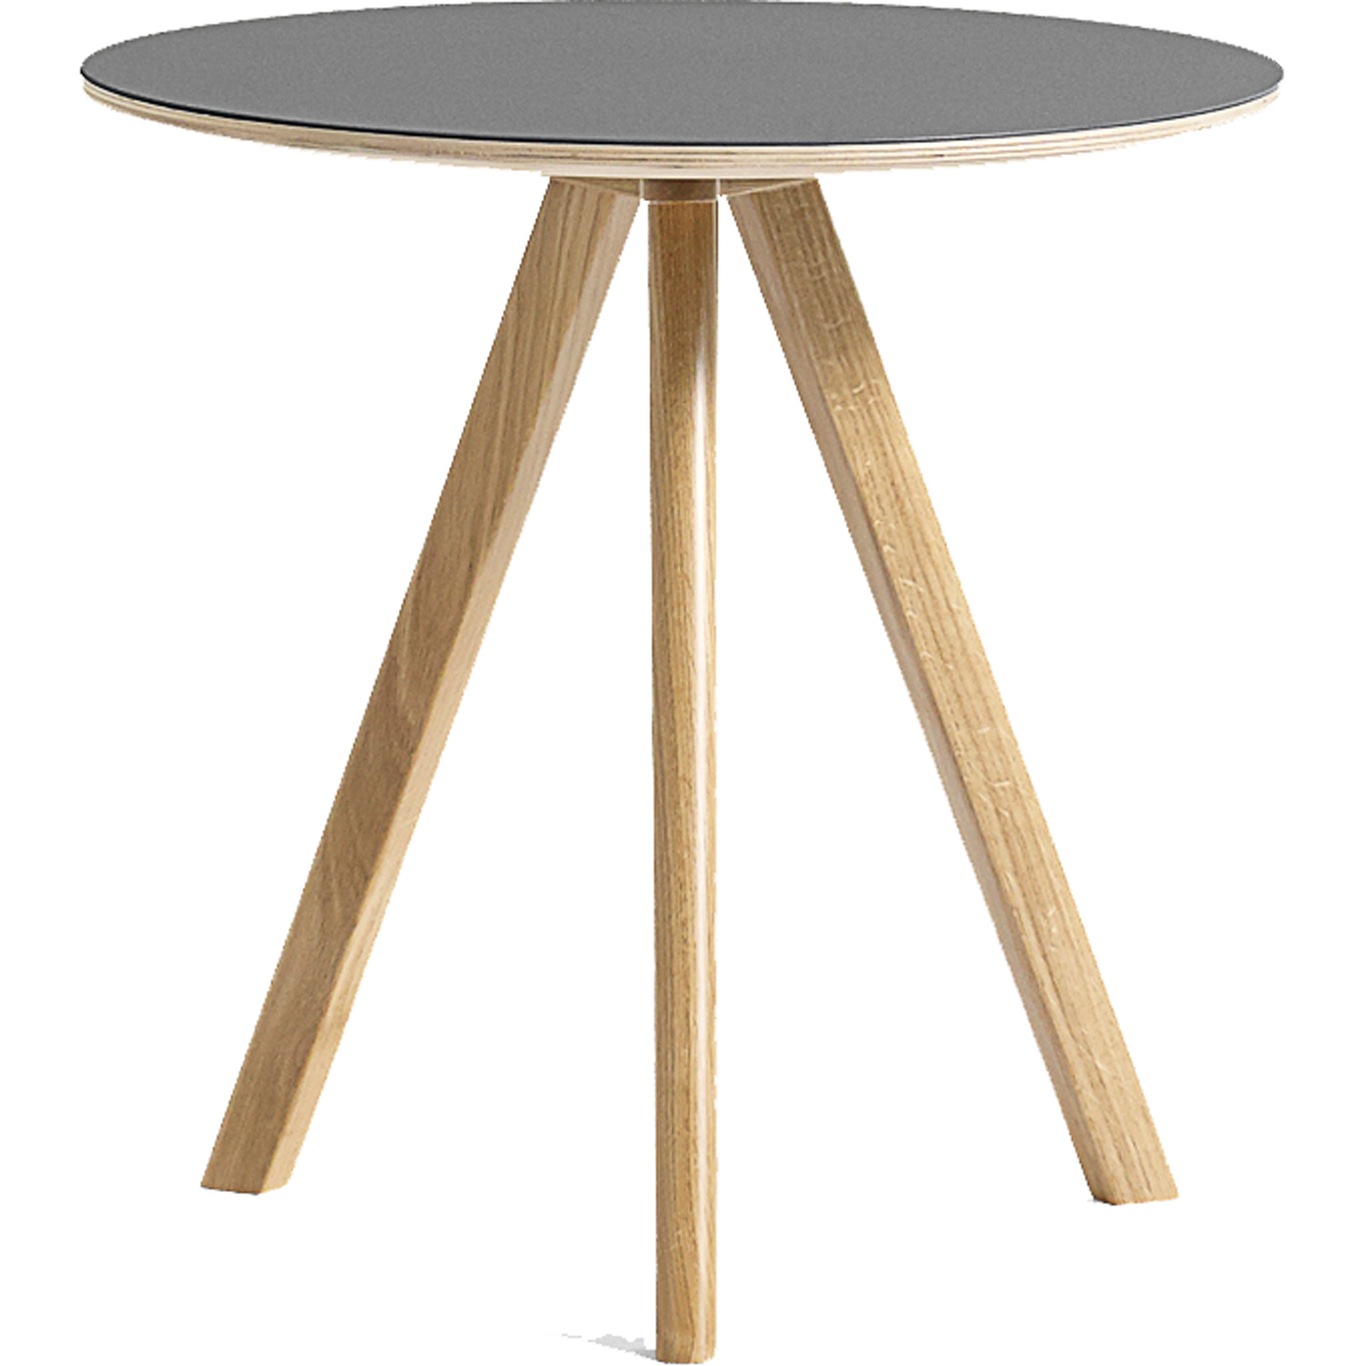 CPH 20 Side Table Ø50x49 cm, Water Based Lacquered Oak / Grey Linoleum